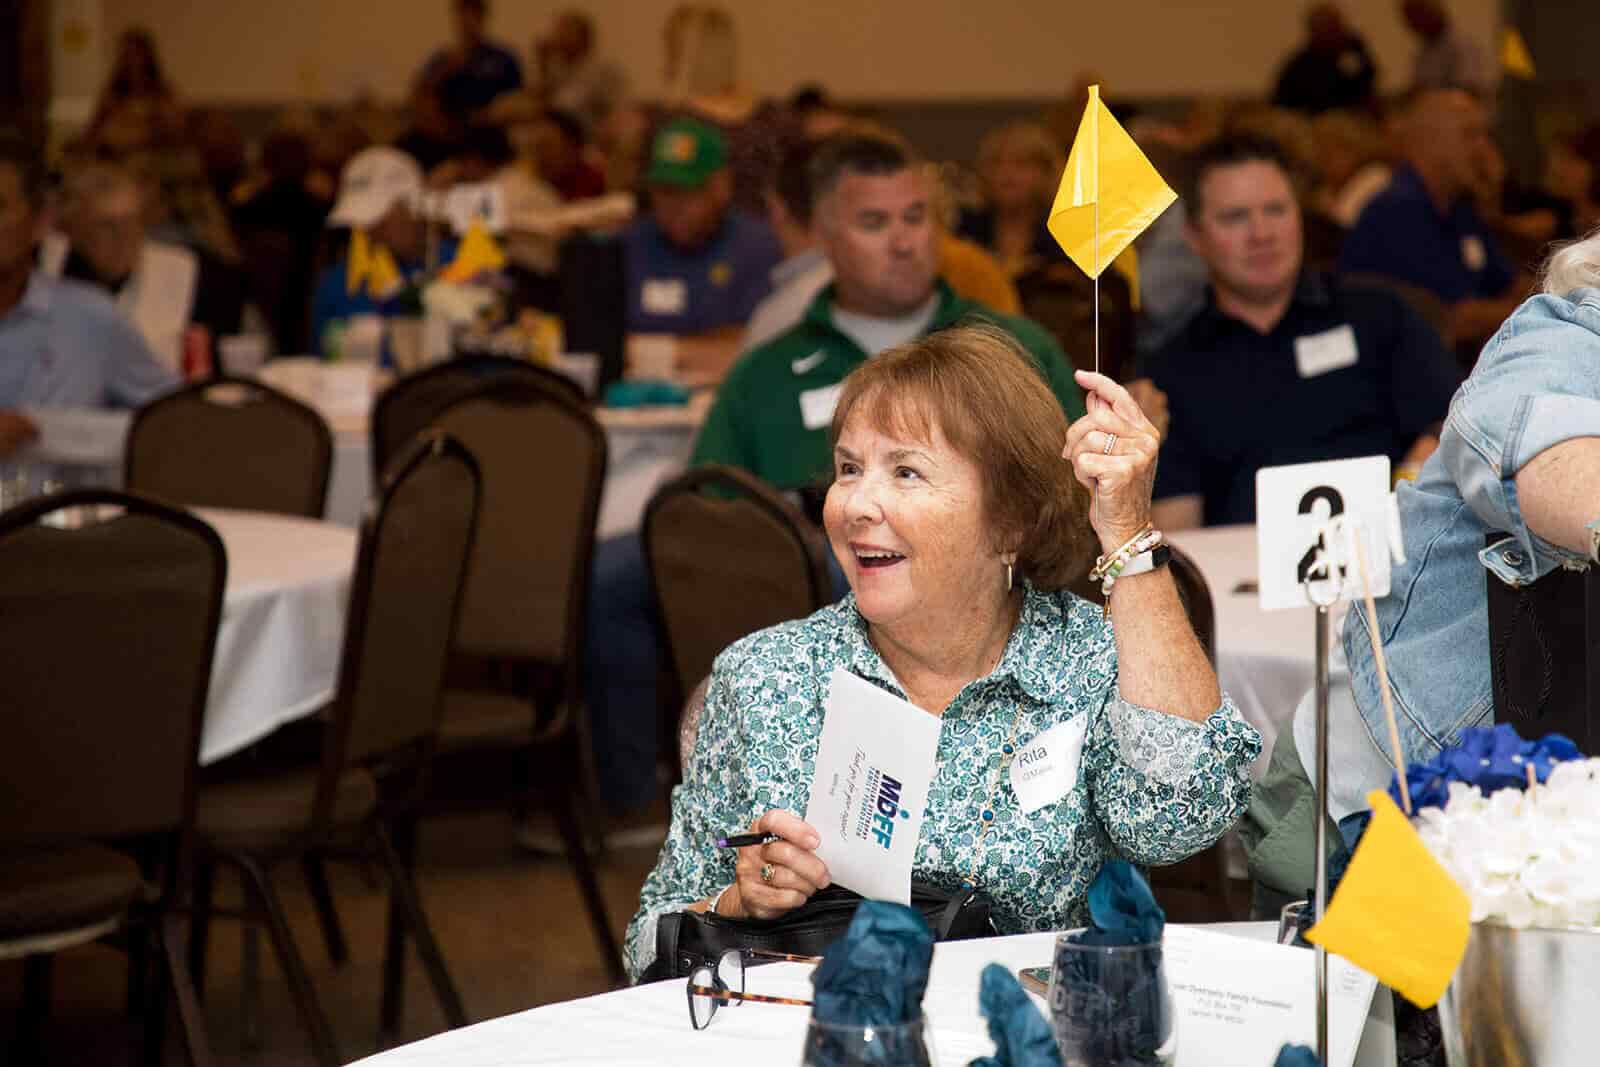 Attendee waving a yellow flag to bid at live auction